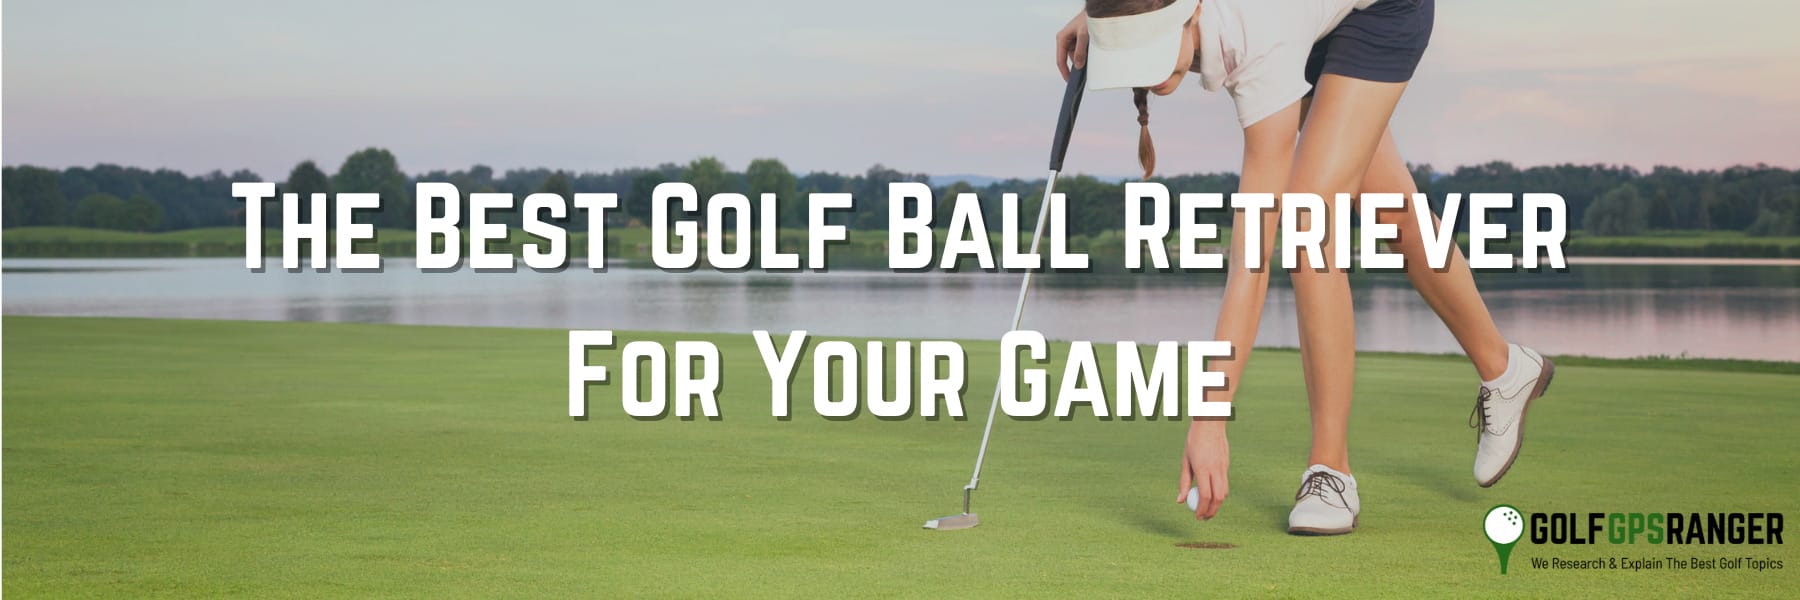 The Ultimate Guide To Choosing The Best Golf Ball Retriever For Your Game